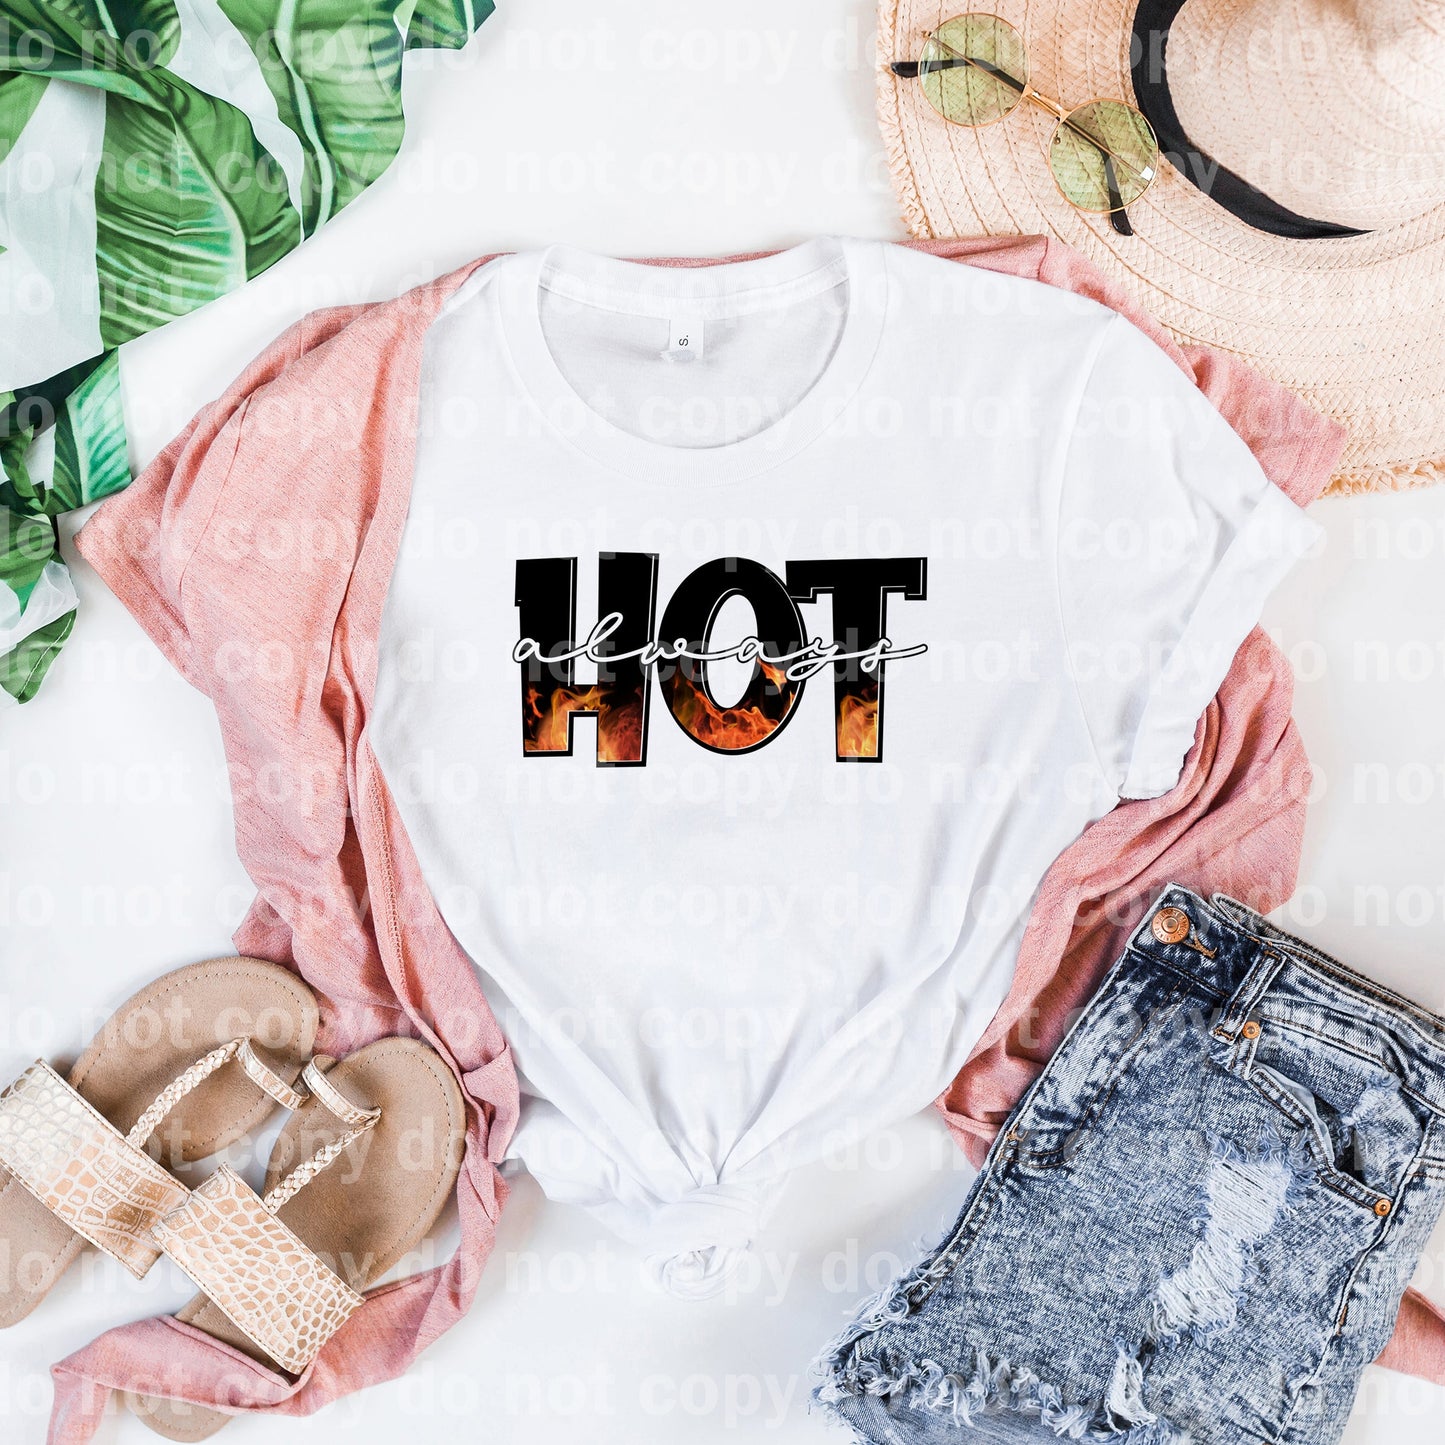 Always Hot Dream Print or Sublimation Print